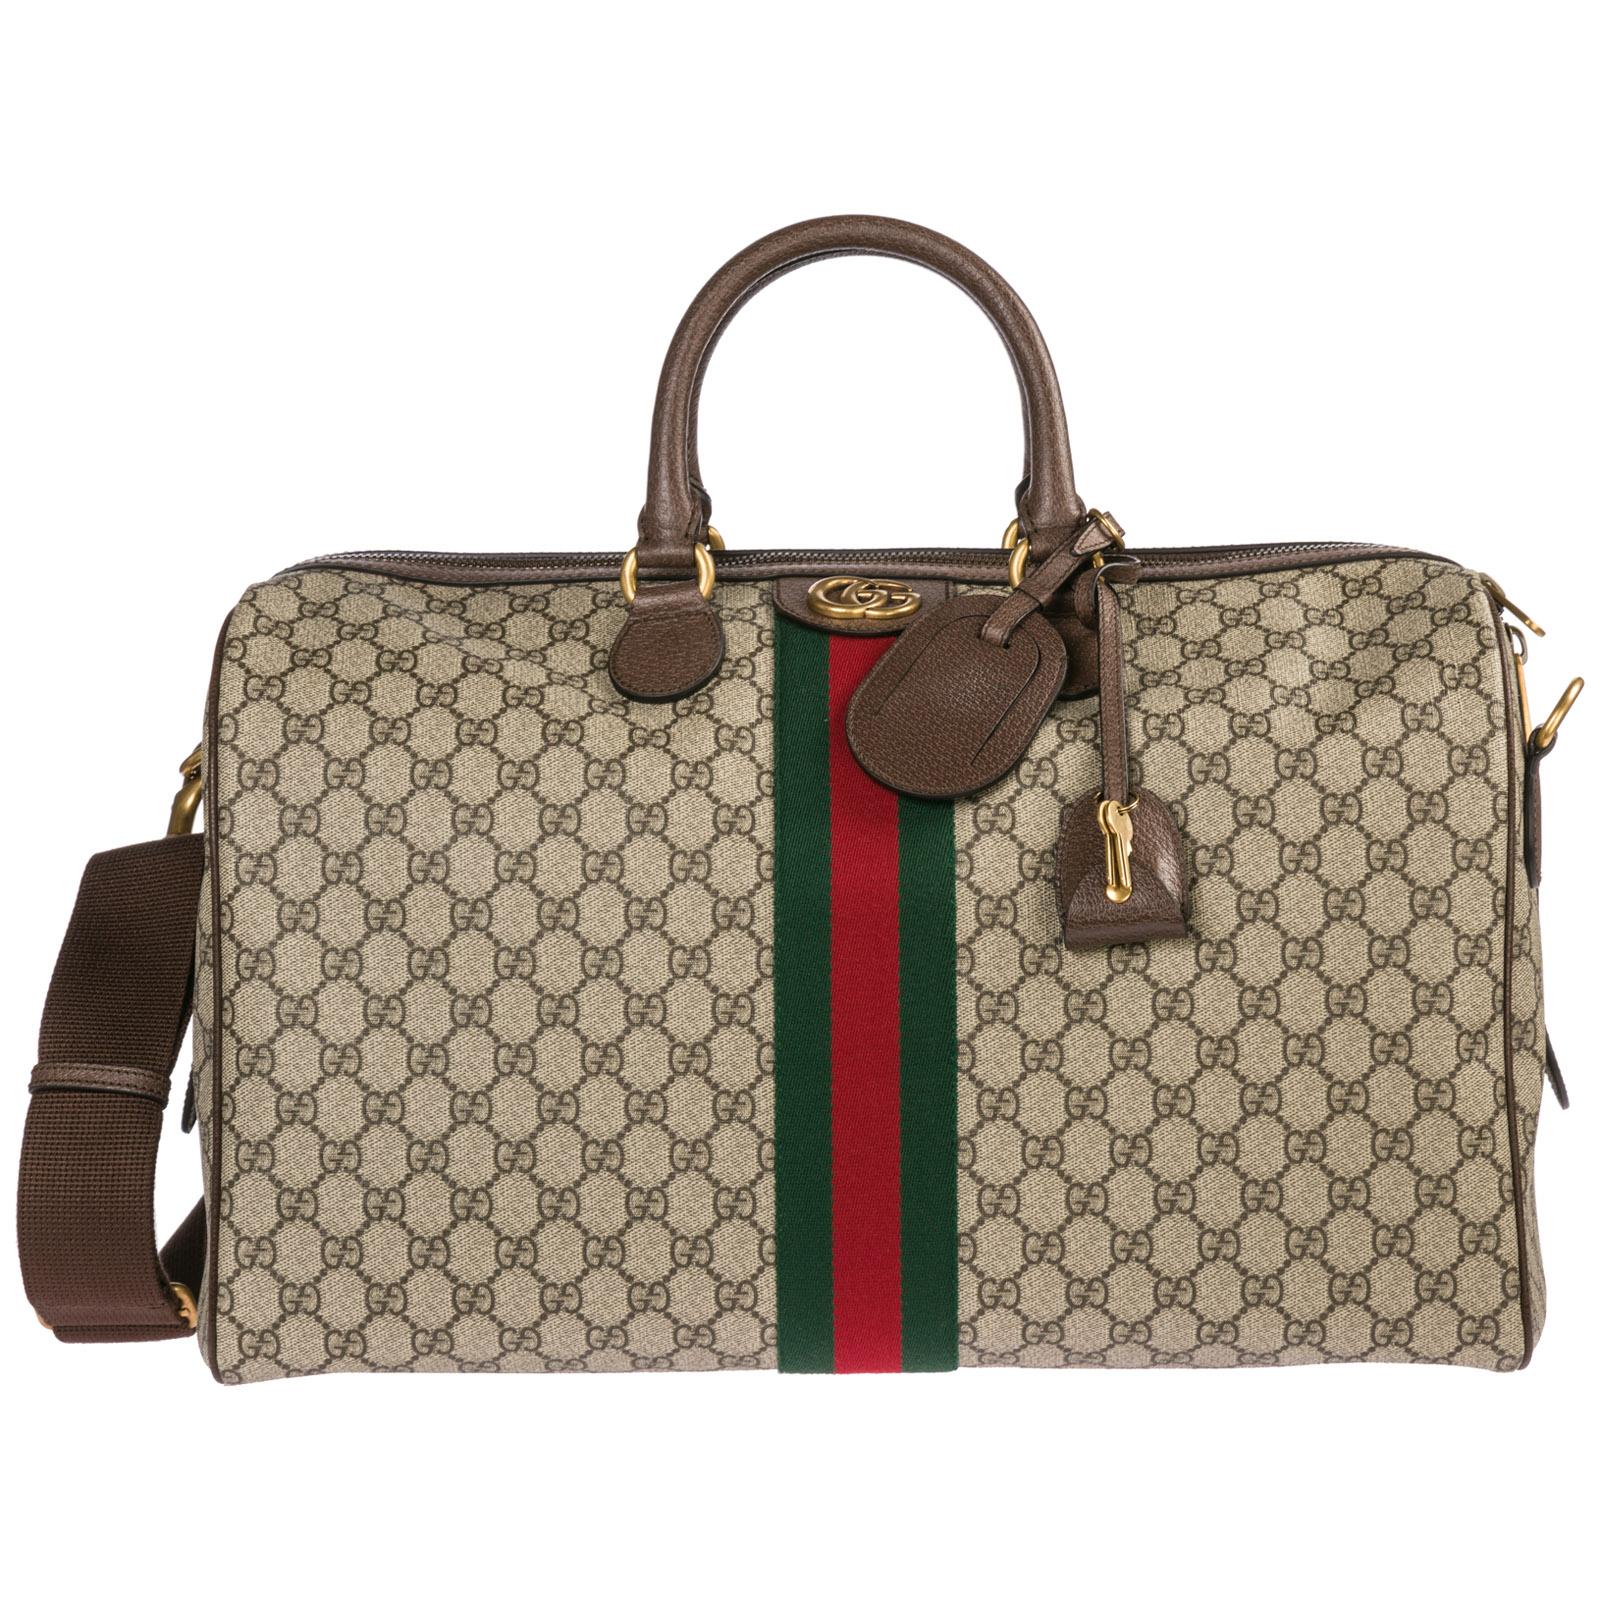 Gucci Genuine Leather Travel Duffle Weekend Shoulder Bag Ophidia in